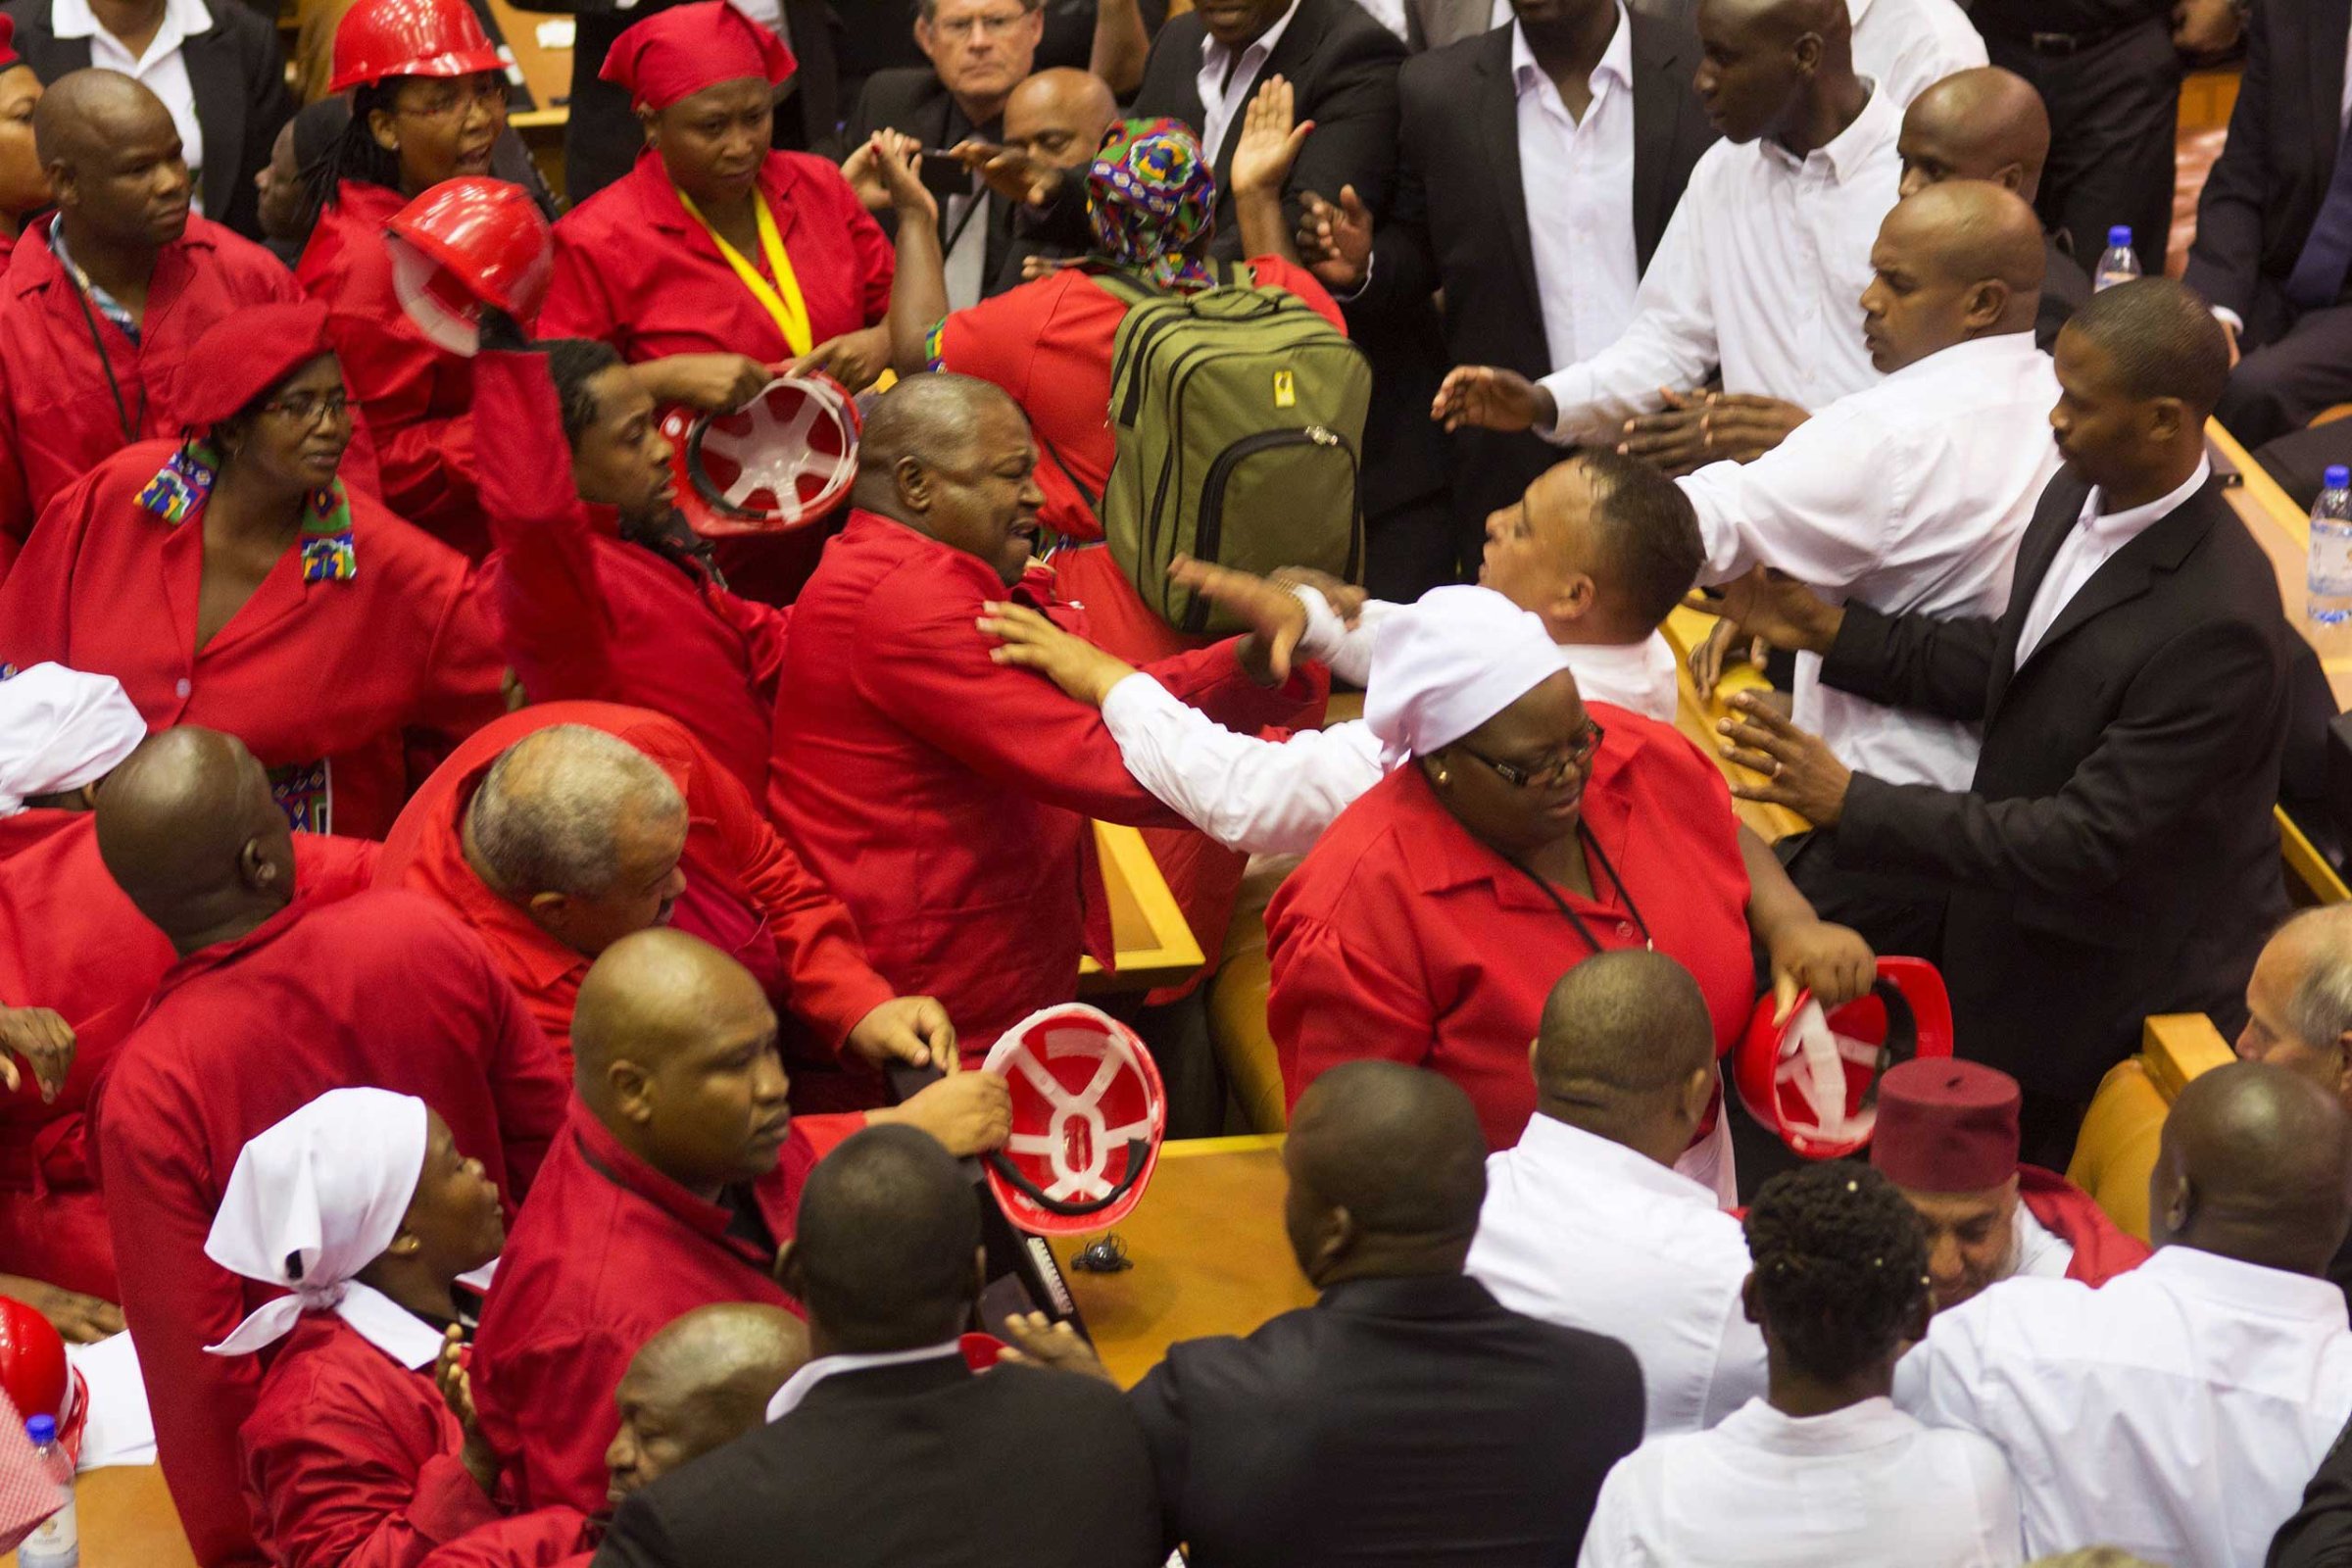 Members of the Economic Freedom Fighters, wearing red uniforms, clash with security forces during South African President's State of the Nation address in Cape Town on Feb. 12, 2015.